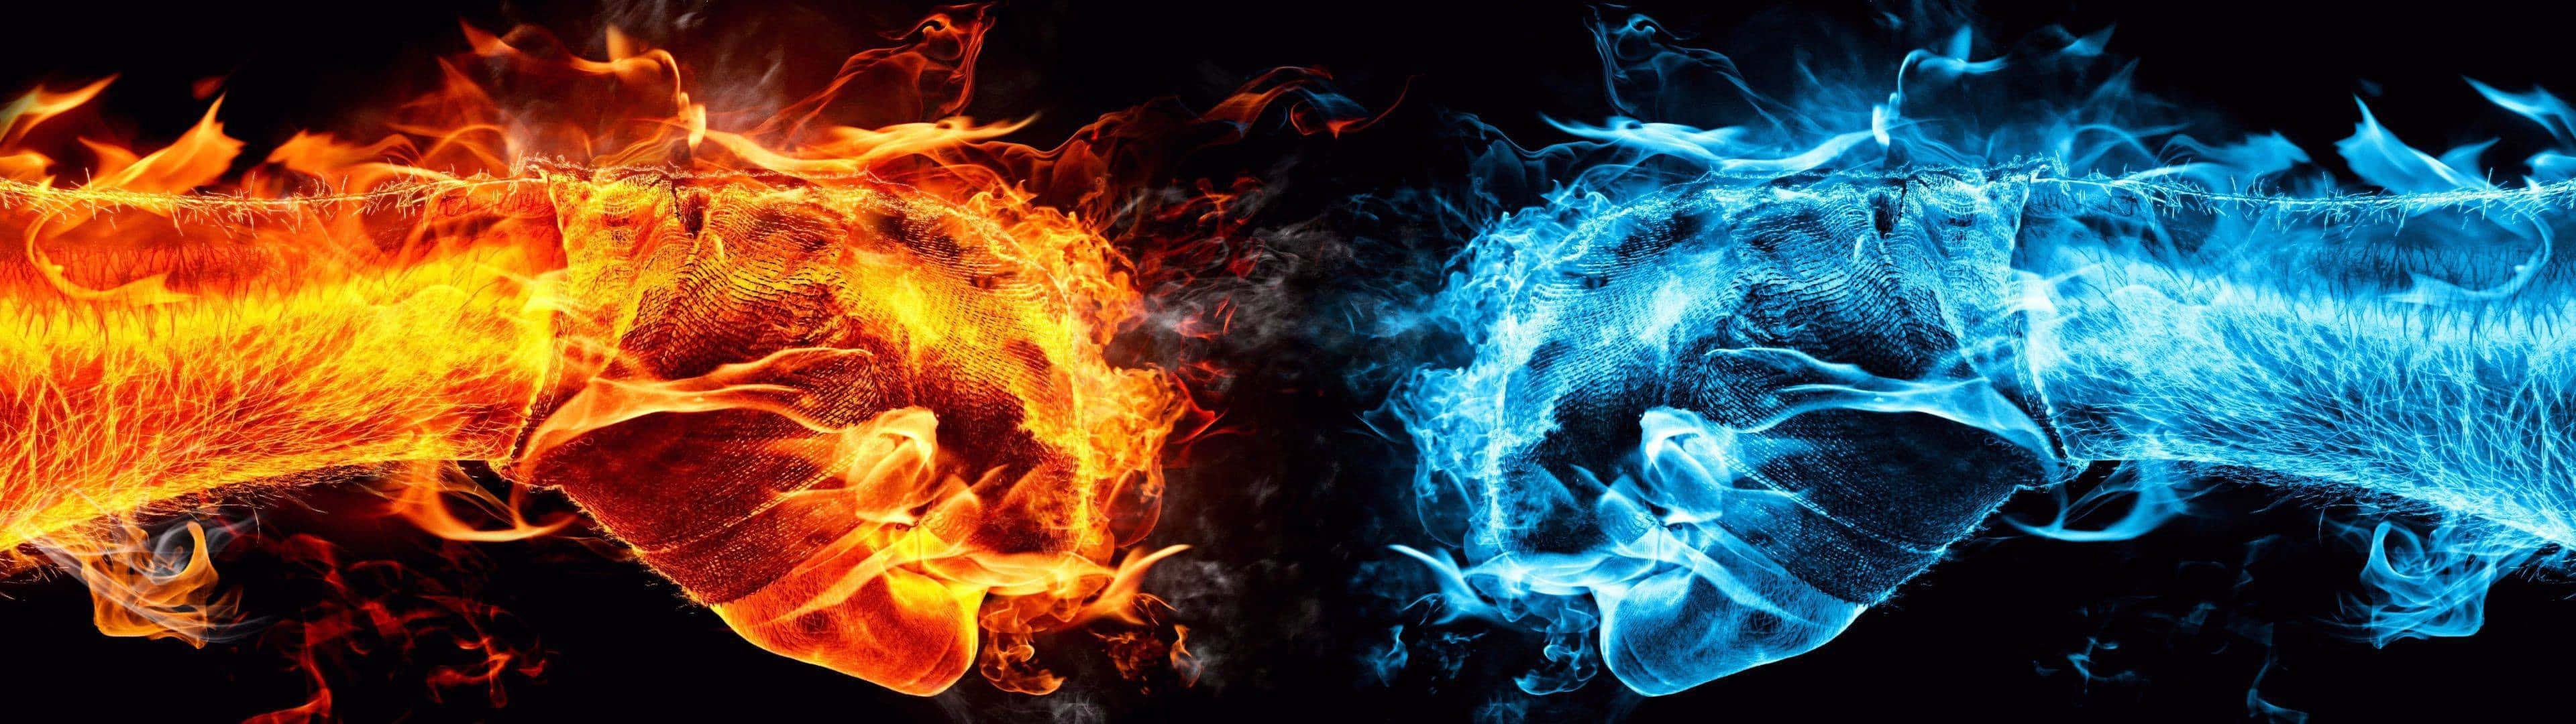 Transforming the world with the power of fire and water Wallpaper